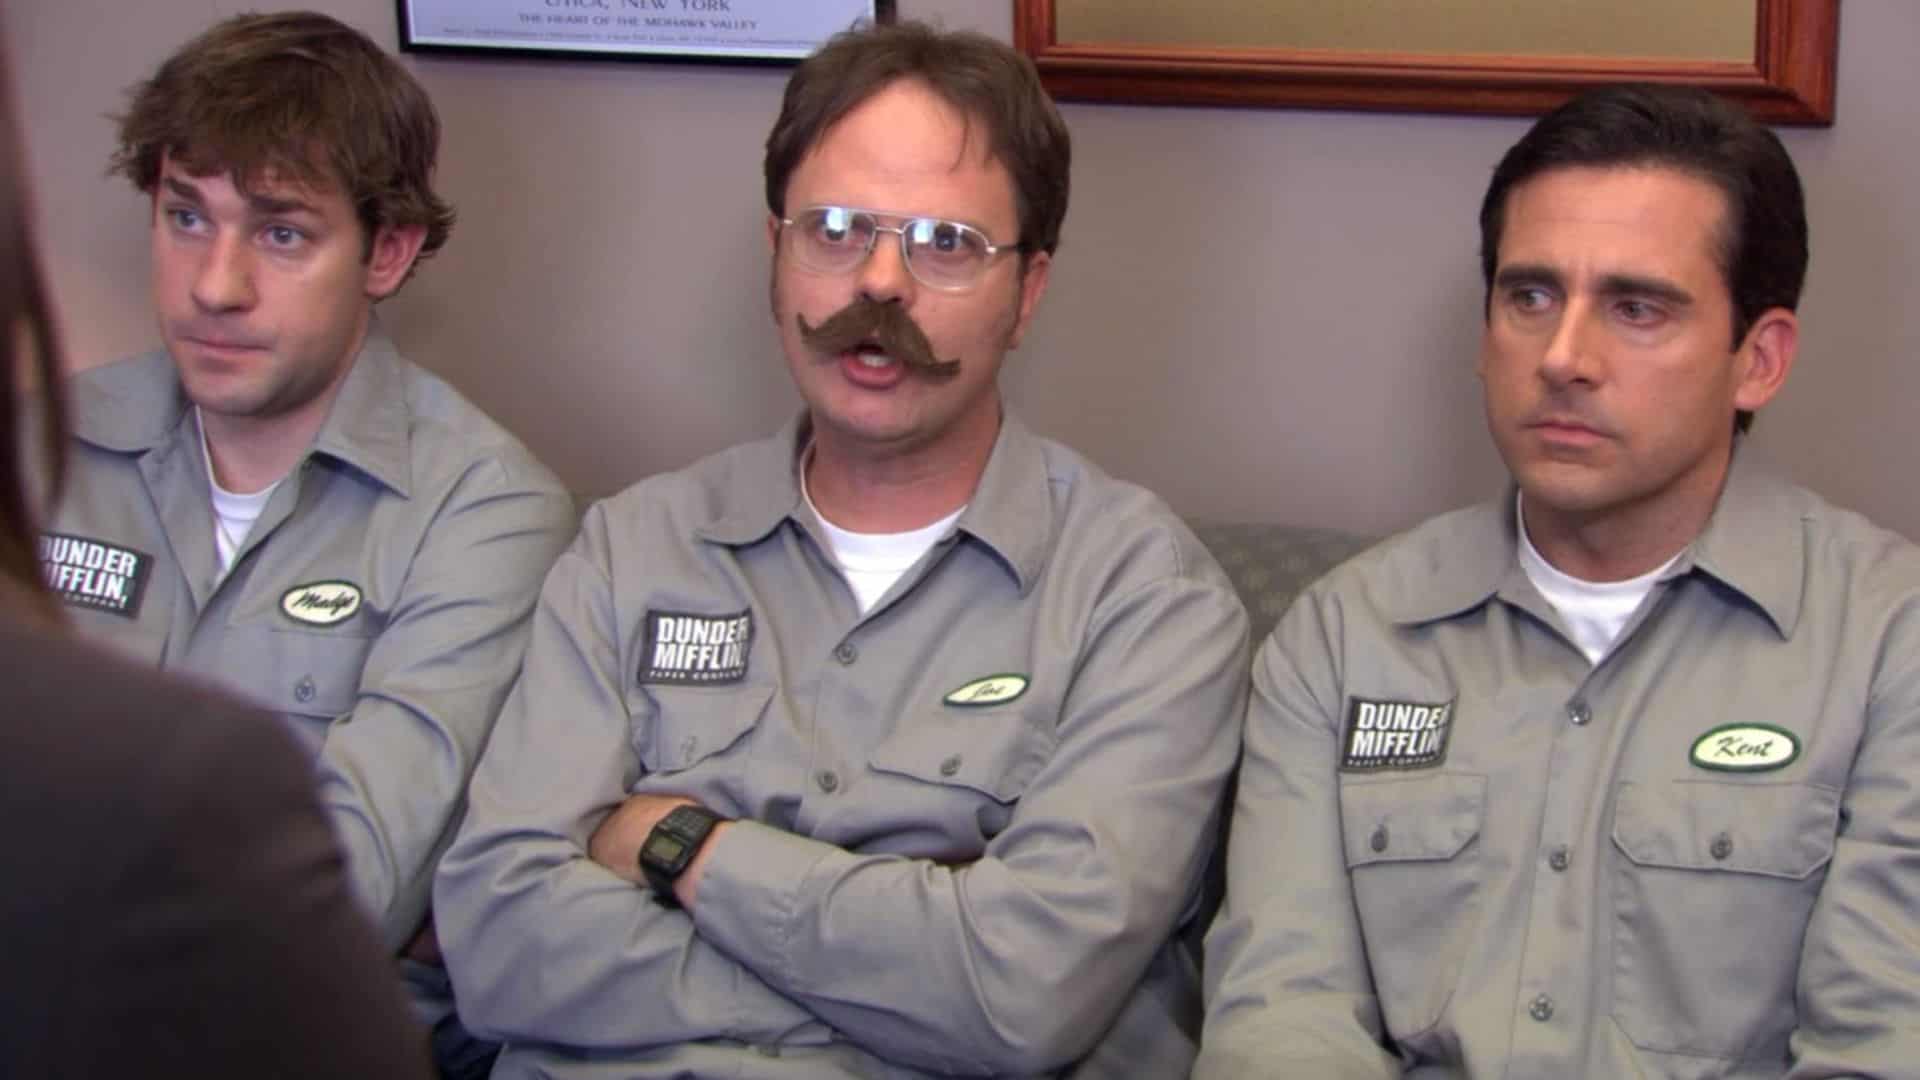 Jim, Dwight, and Michael in disguise as they try to pull off a prank in this image from Peacock.